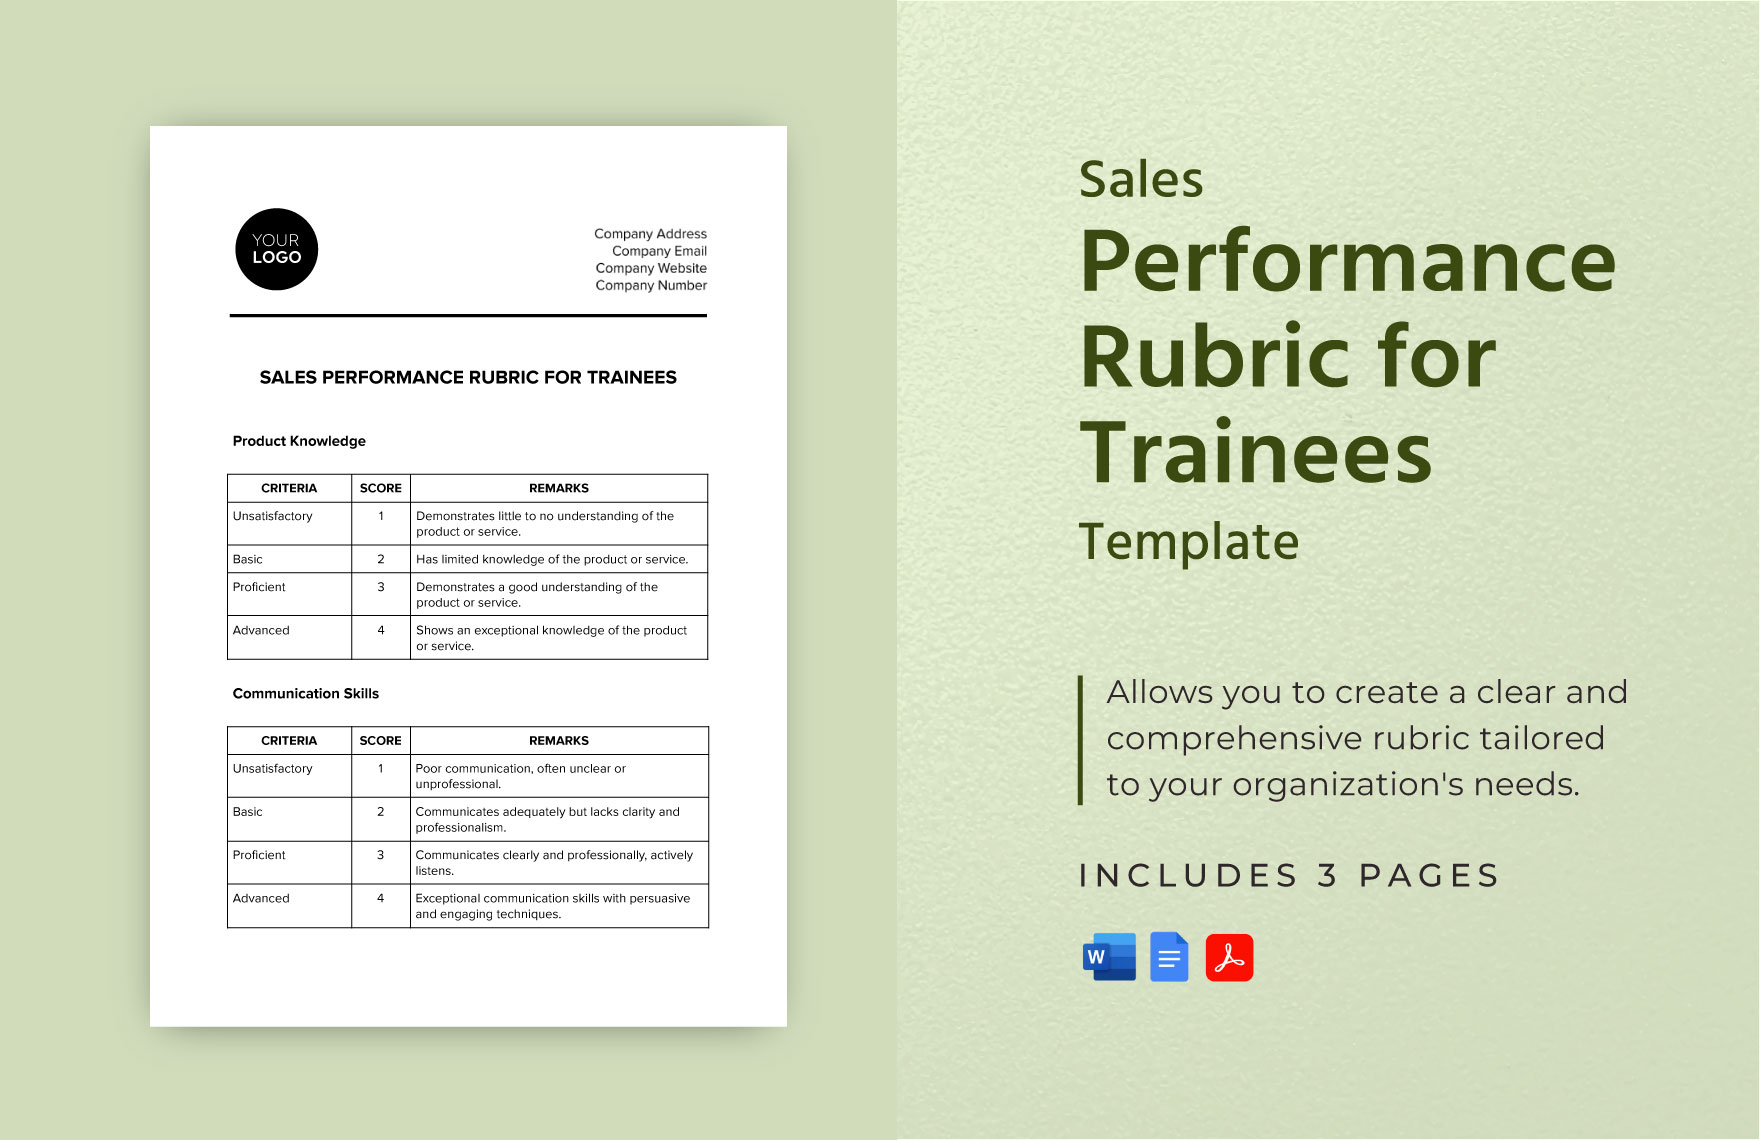 Sales Performance Rubric for Trainees Template in Word, Google Docs, PDF